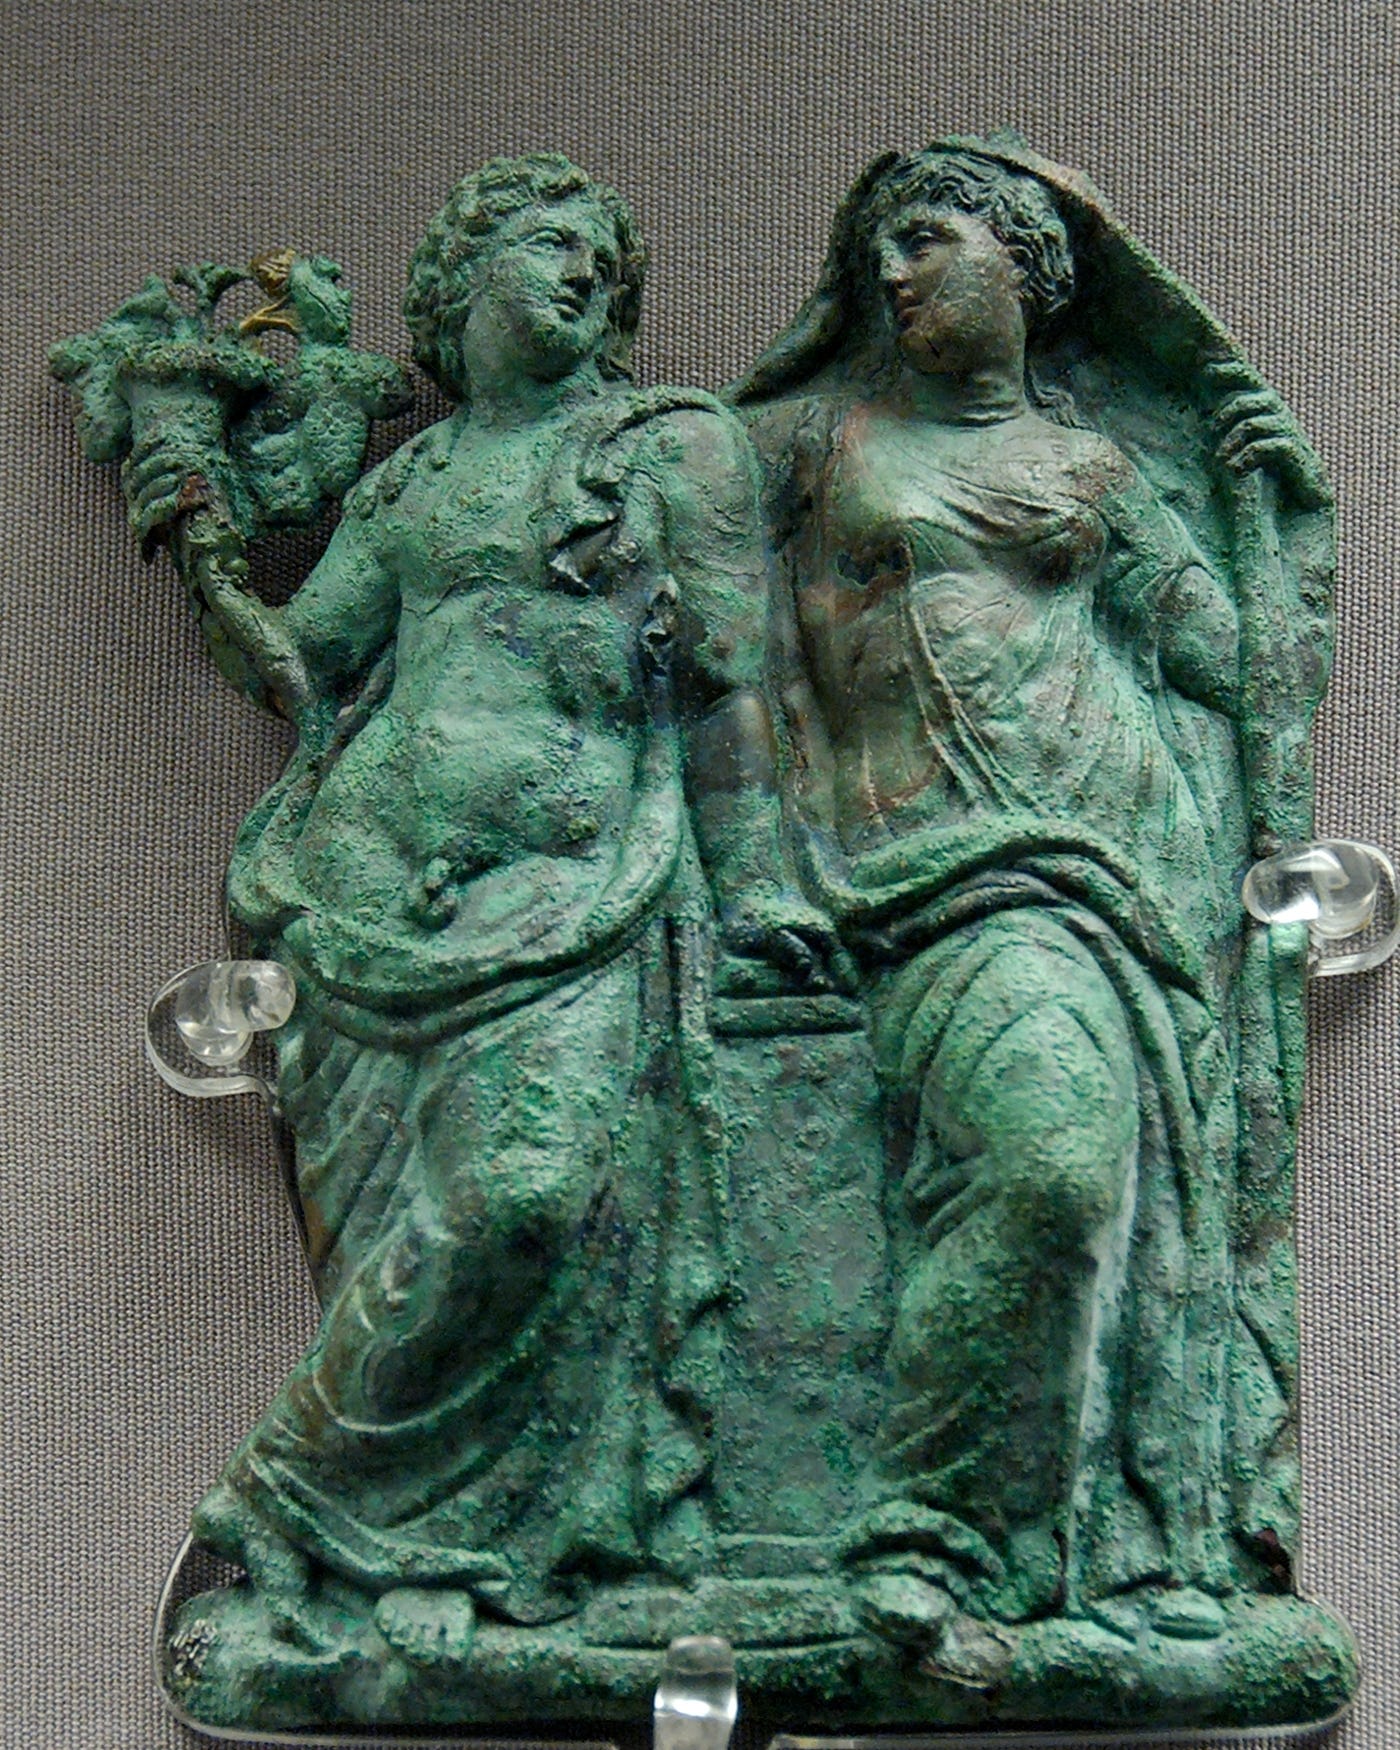 Ariadne as the consort of Dionysus: Bronze Appliqué from Chalki, Rhodes, late 4th century BCE.